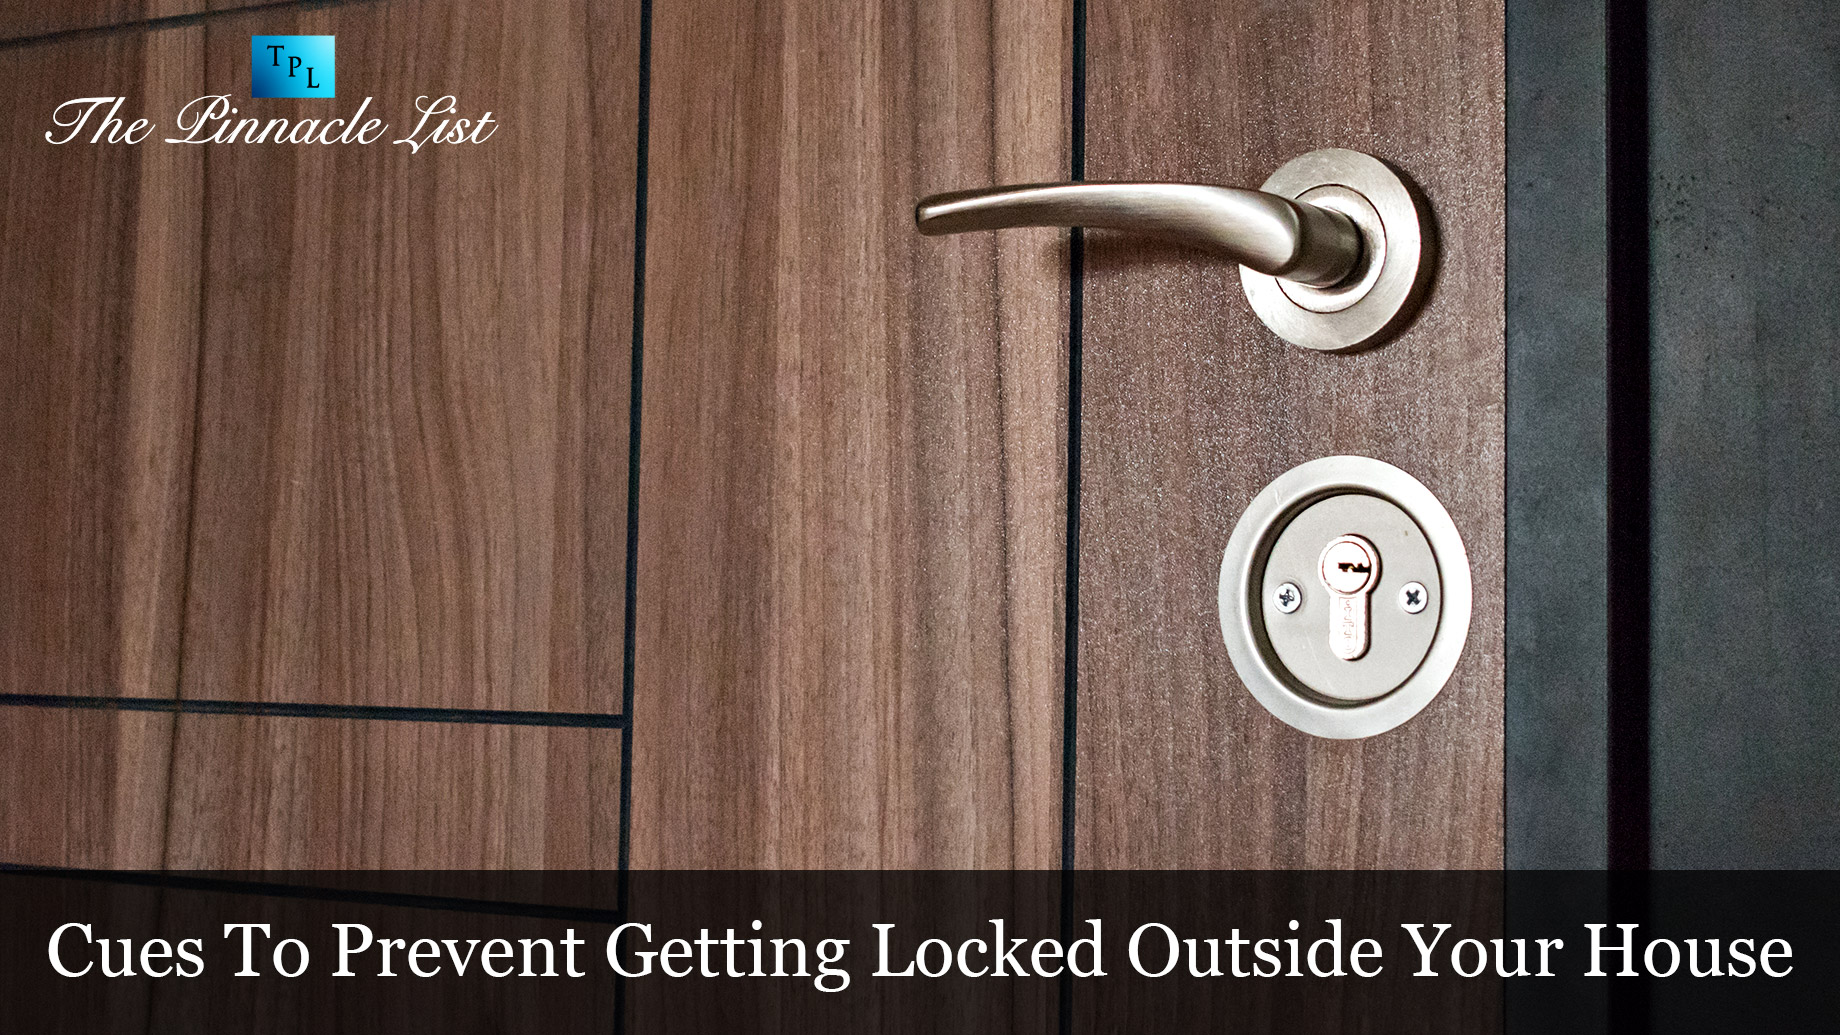 Cues To Prevent Getting Locked Outside Your House